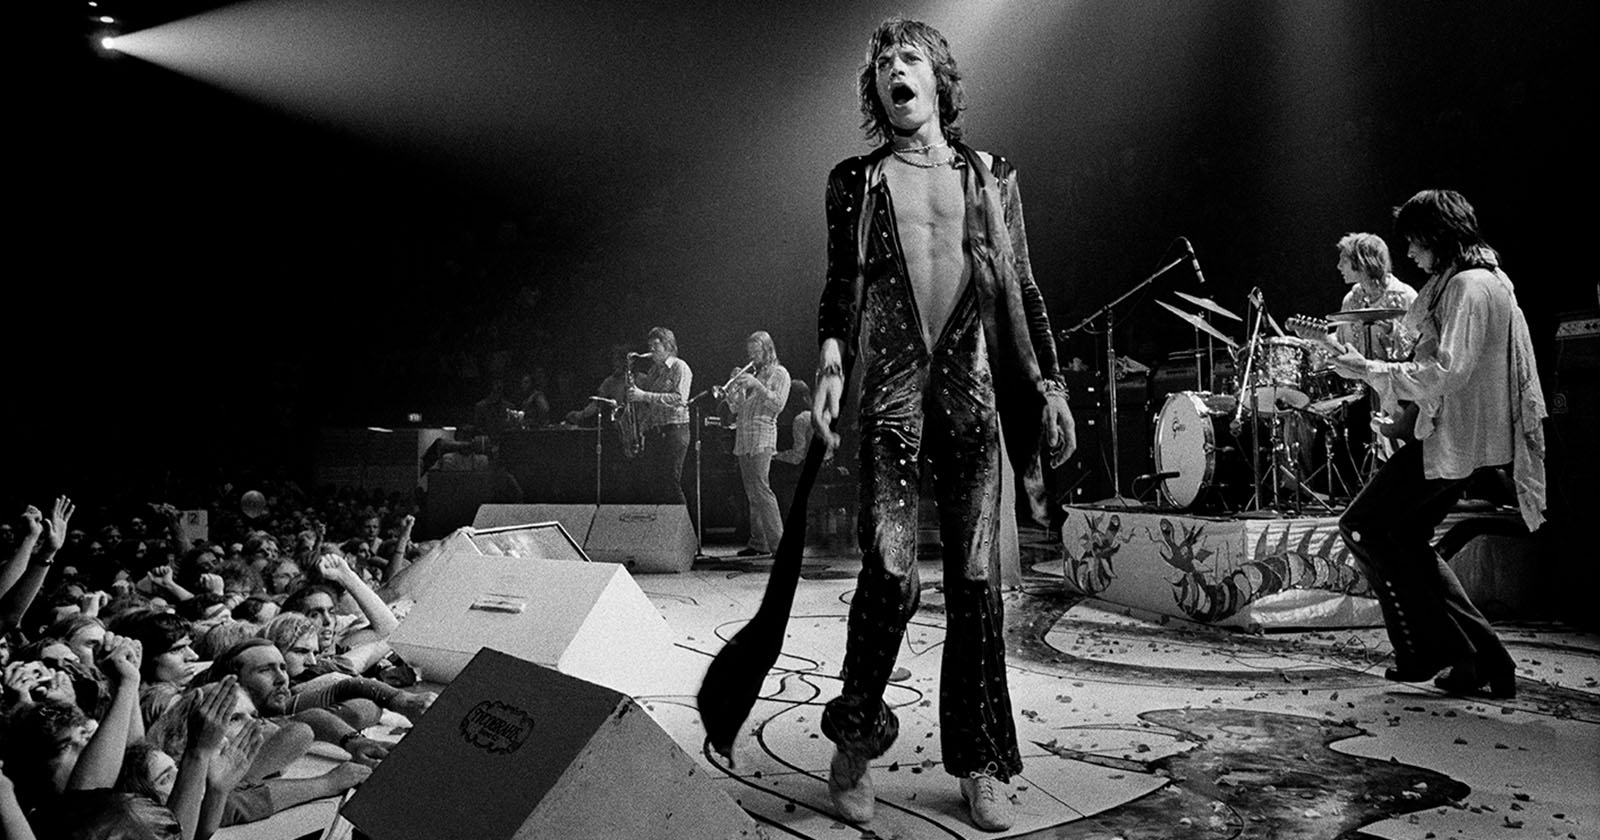 Legendary Music Photographer’s Wild Images from 1972 Rolling Stones Tour